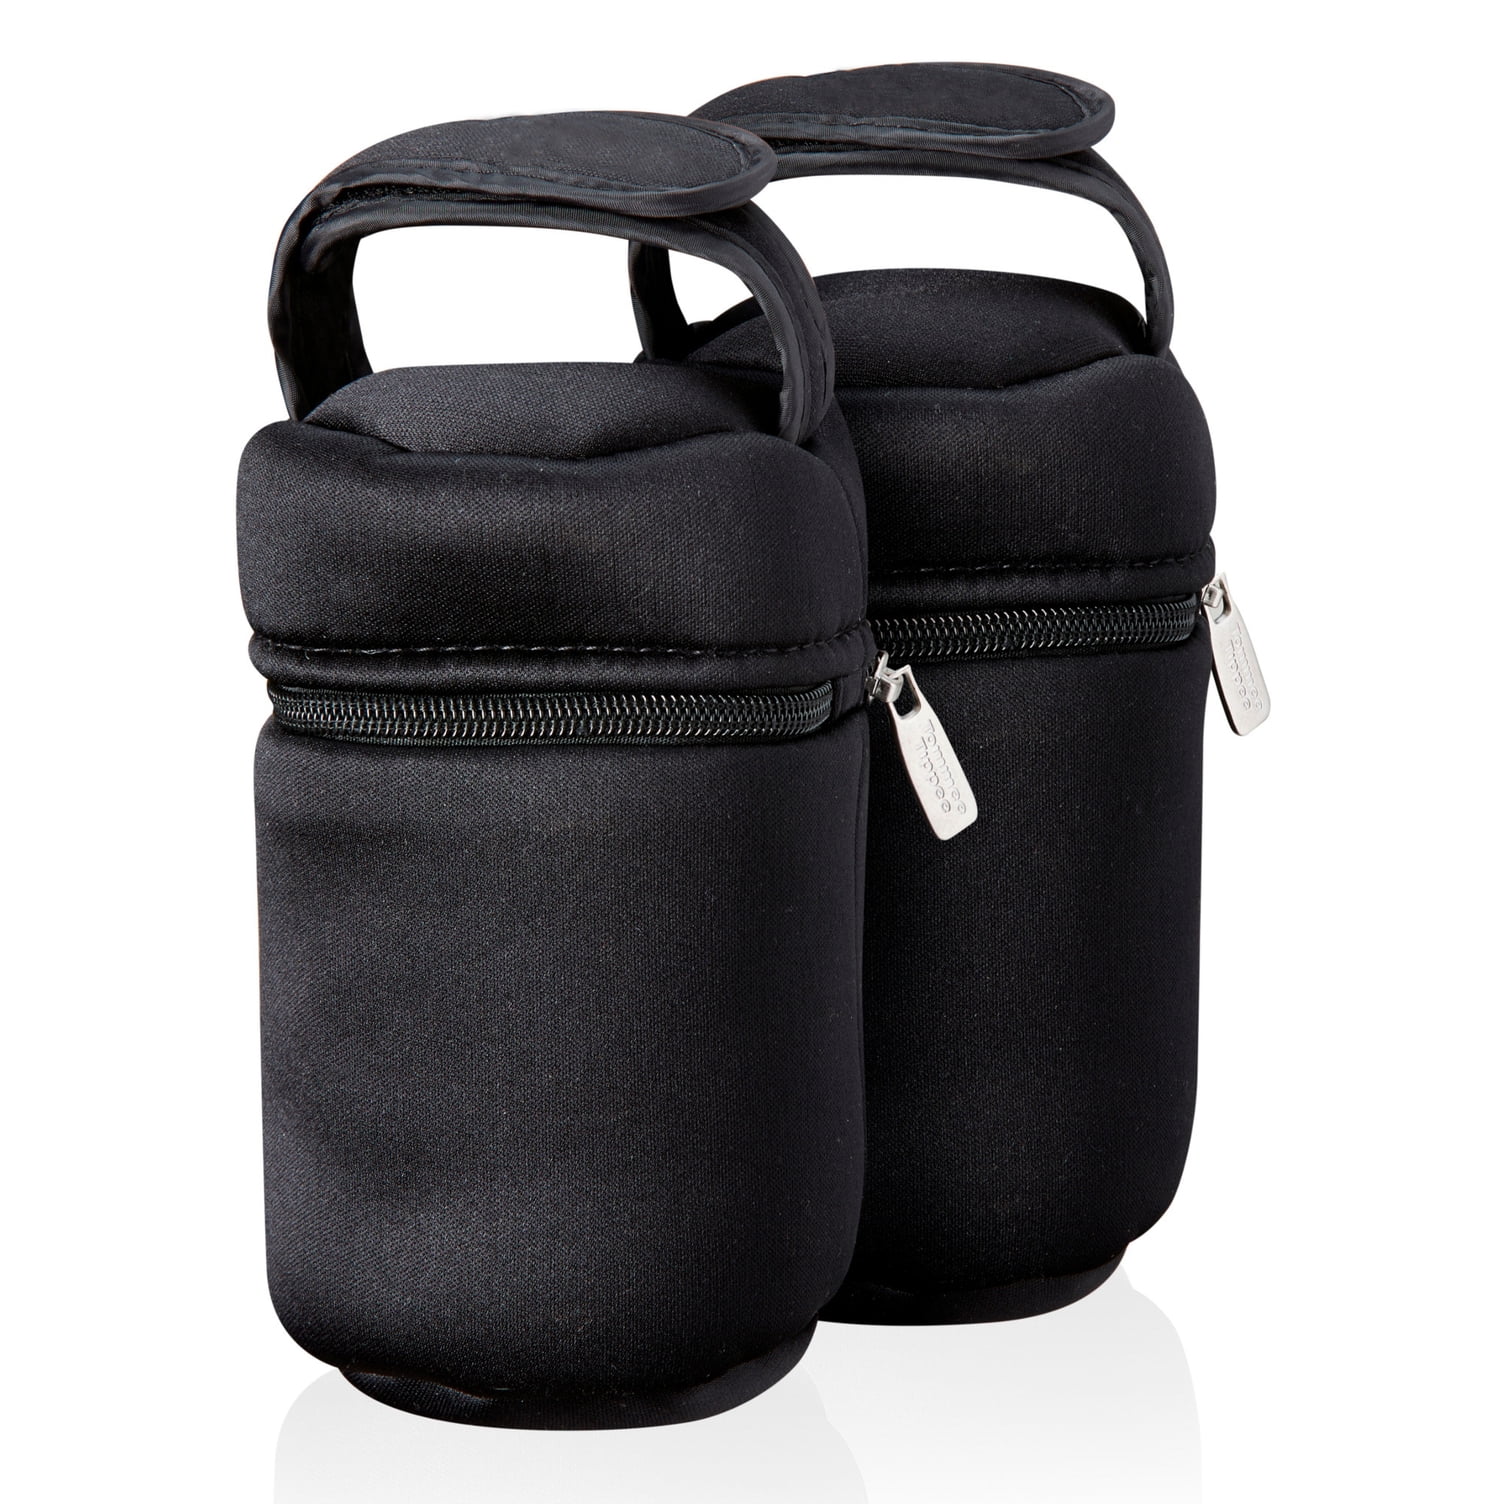 New Baby Food Bottle Bag Warmer Insulated Bag Lunch Bag With Stroller Hand Strap 